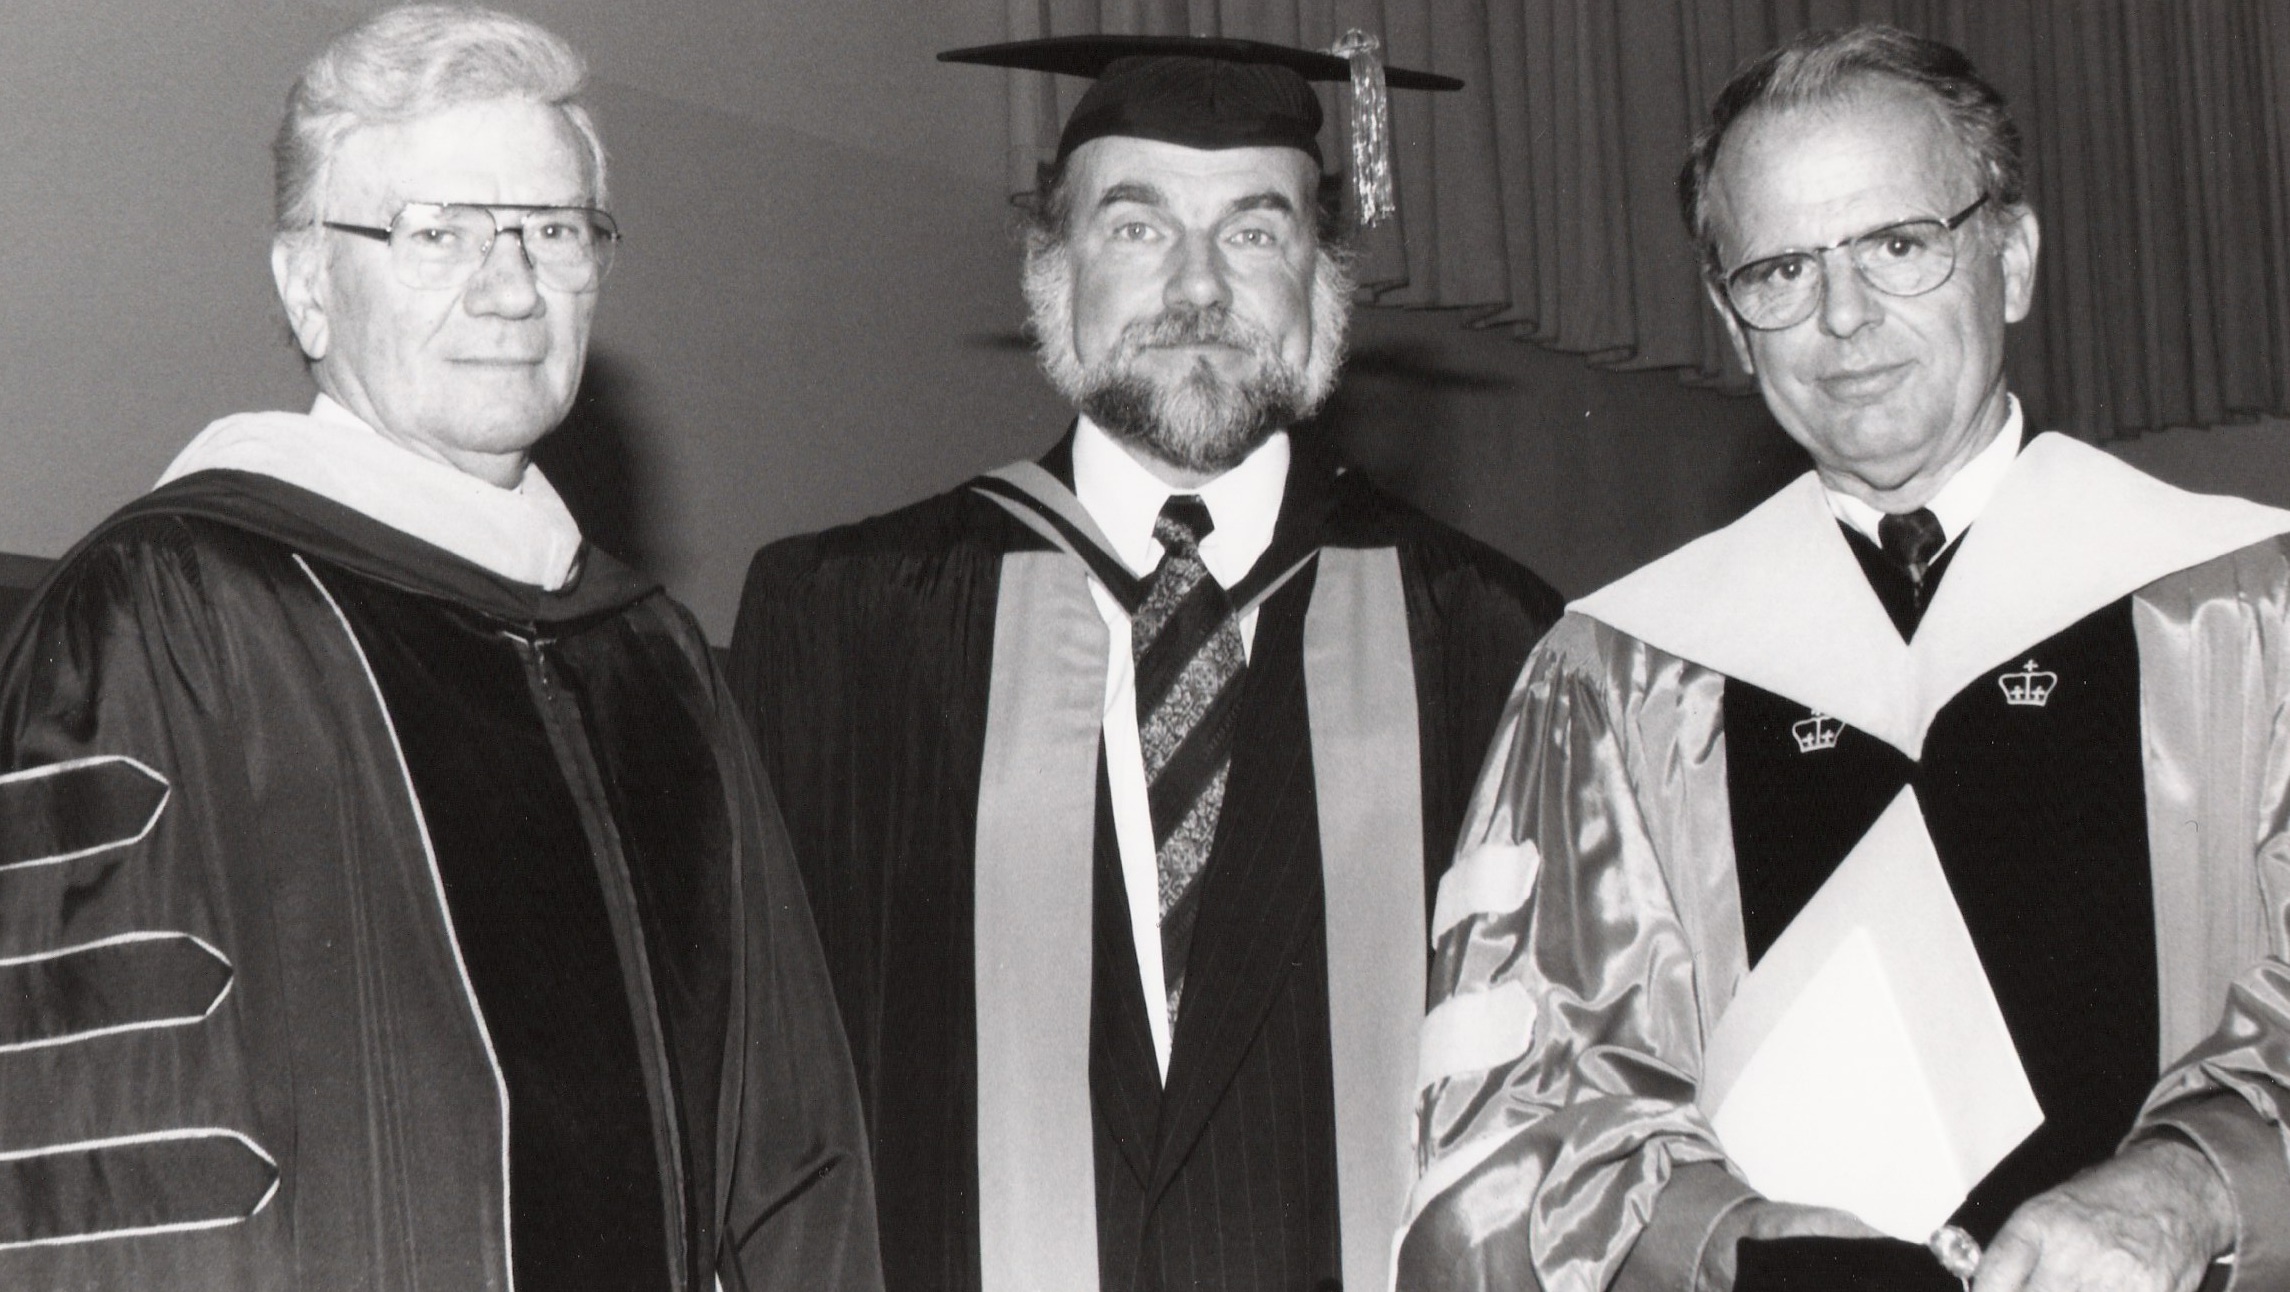 Three Messiah College leaders (L to R) -- Trustee Ernest L. Boyer, President Rodney J. Sawatsky, and President D. Ray Hostetter -- at Sawatsky's inauguration in 1994. (Brethren in Christ Historical Library and Archives)